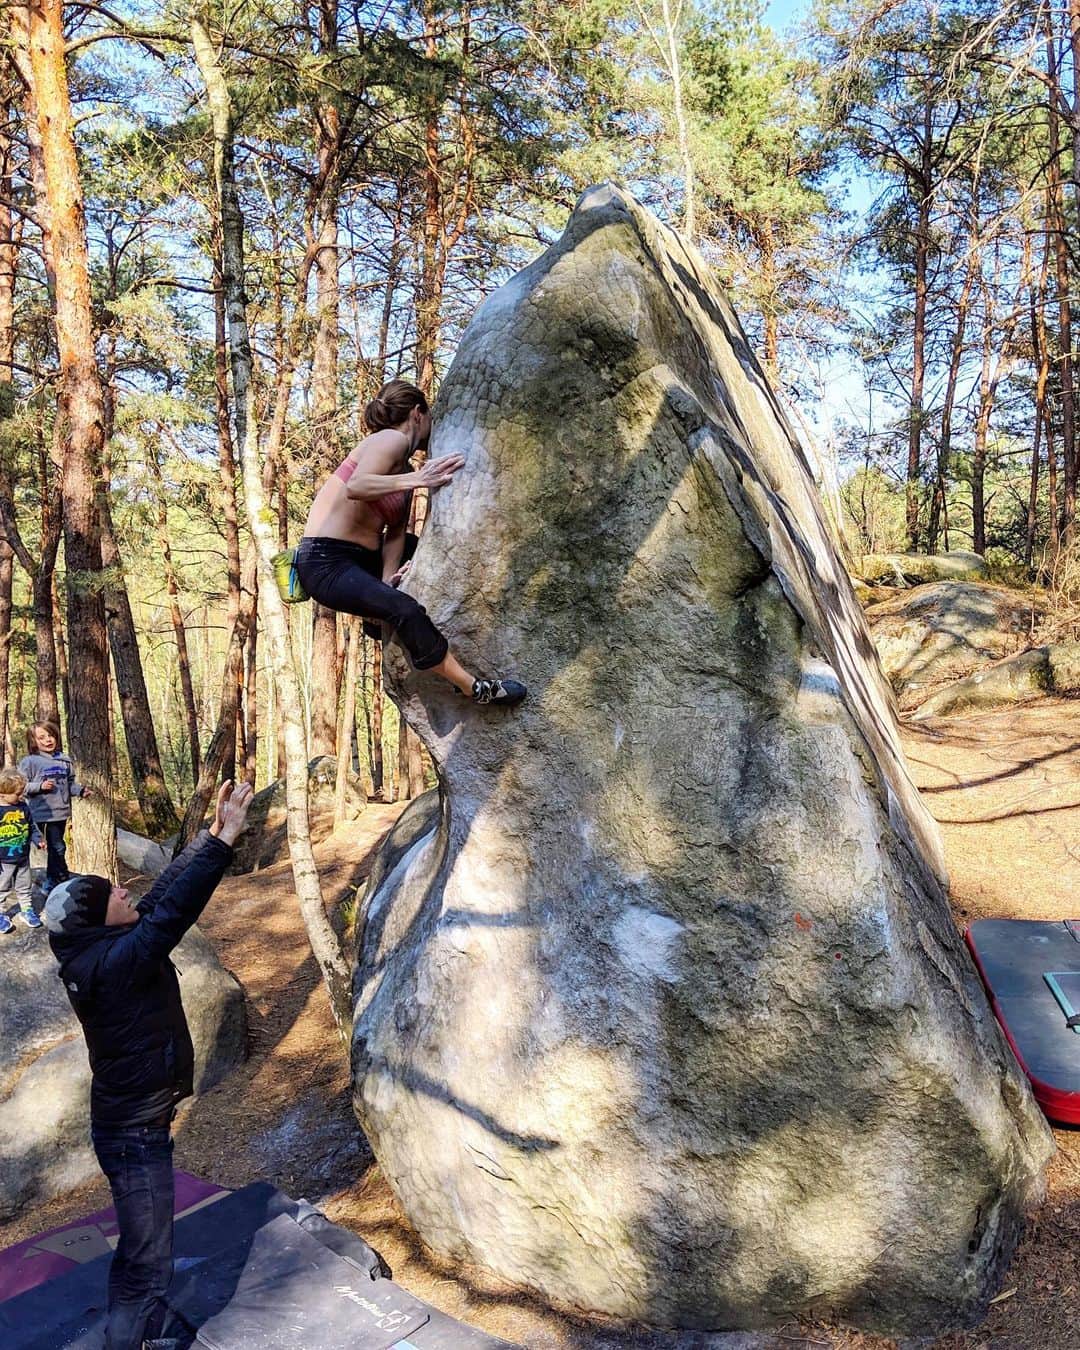 ベス・ロッデンのインスタグラム：「I first tried El Poussif in 2003 during the height of my climbing career. I was at my skinny "fighting weight" and expected to waltz up a Fontainebleau classic. I threw myself at it over and over, but finally realized that it was too hard for me. Dejected, I walked away, skipped dinner that night and did double the push ups and pull ups as a sort of self punishment.  This past spring I came back and tried again. I was at least fifteen pounds heavier and succeeded. At some point in my life, that's the extent of the story I needed to hear: that being thin wasn't the only path for me to climb hard. But now I realize that's not the most important lesson for me. It's not just about climbing hard. Perhaps it took the physical act of climbing something I couldn't climb before for me to understand, but it's actually what happened underneath that is the most important and has led to those successes.  I've wondered how it would have changed things for me if I heard this sort of story at different points in my life. What would I have done as a hungry, tiny teenage competition climber hearing that I could climb hard even if I was heavier? What would I have done as an angsty, driven and achievement focused twenty something knowing that I could climb something that I once failed on and feel success without the external praise and accolades? What would I have done as a postpartum mom in my thirties, crying myself to sleep at night, knowing that with some self love and compassion I could actually love this new, saggier, softer, heavier body instead of constantly resenting it? What would I have done seeing a picture of me smiling happily and proudly without a ripped firm belly?  I know that I've been influenced greatly by what my heroes have told me or what I've seen in the magazines  and on screens. Rationally, I know we should all make our own decisions, but in reality representation matters. Someday this caption will read "Beth tried really hard and was happy to stand on top of this boulder" but until then, it means more than that. // @outdoorresearch @metoliusclimbing @touchstoneclimbing @bluewaterropes @ospreypacks @skinourishment @clifbar @lasportivana #orambassador」